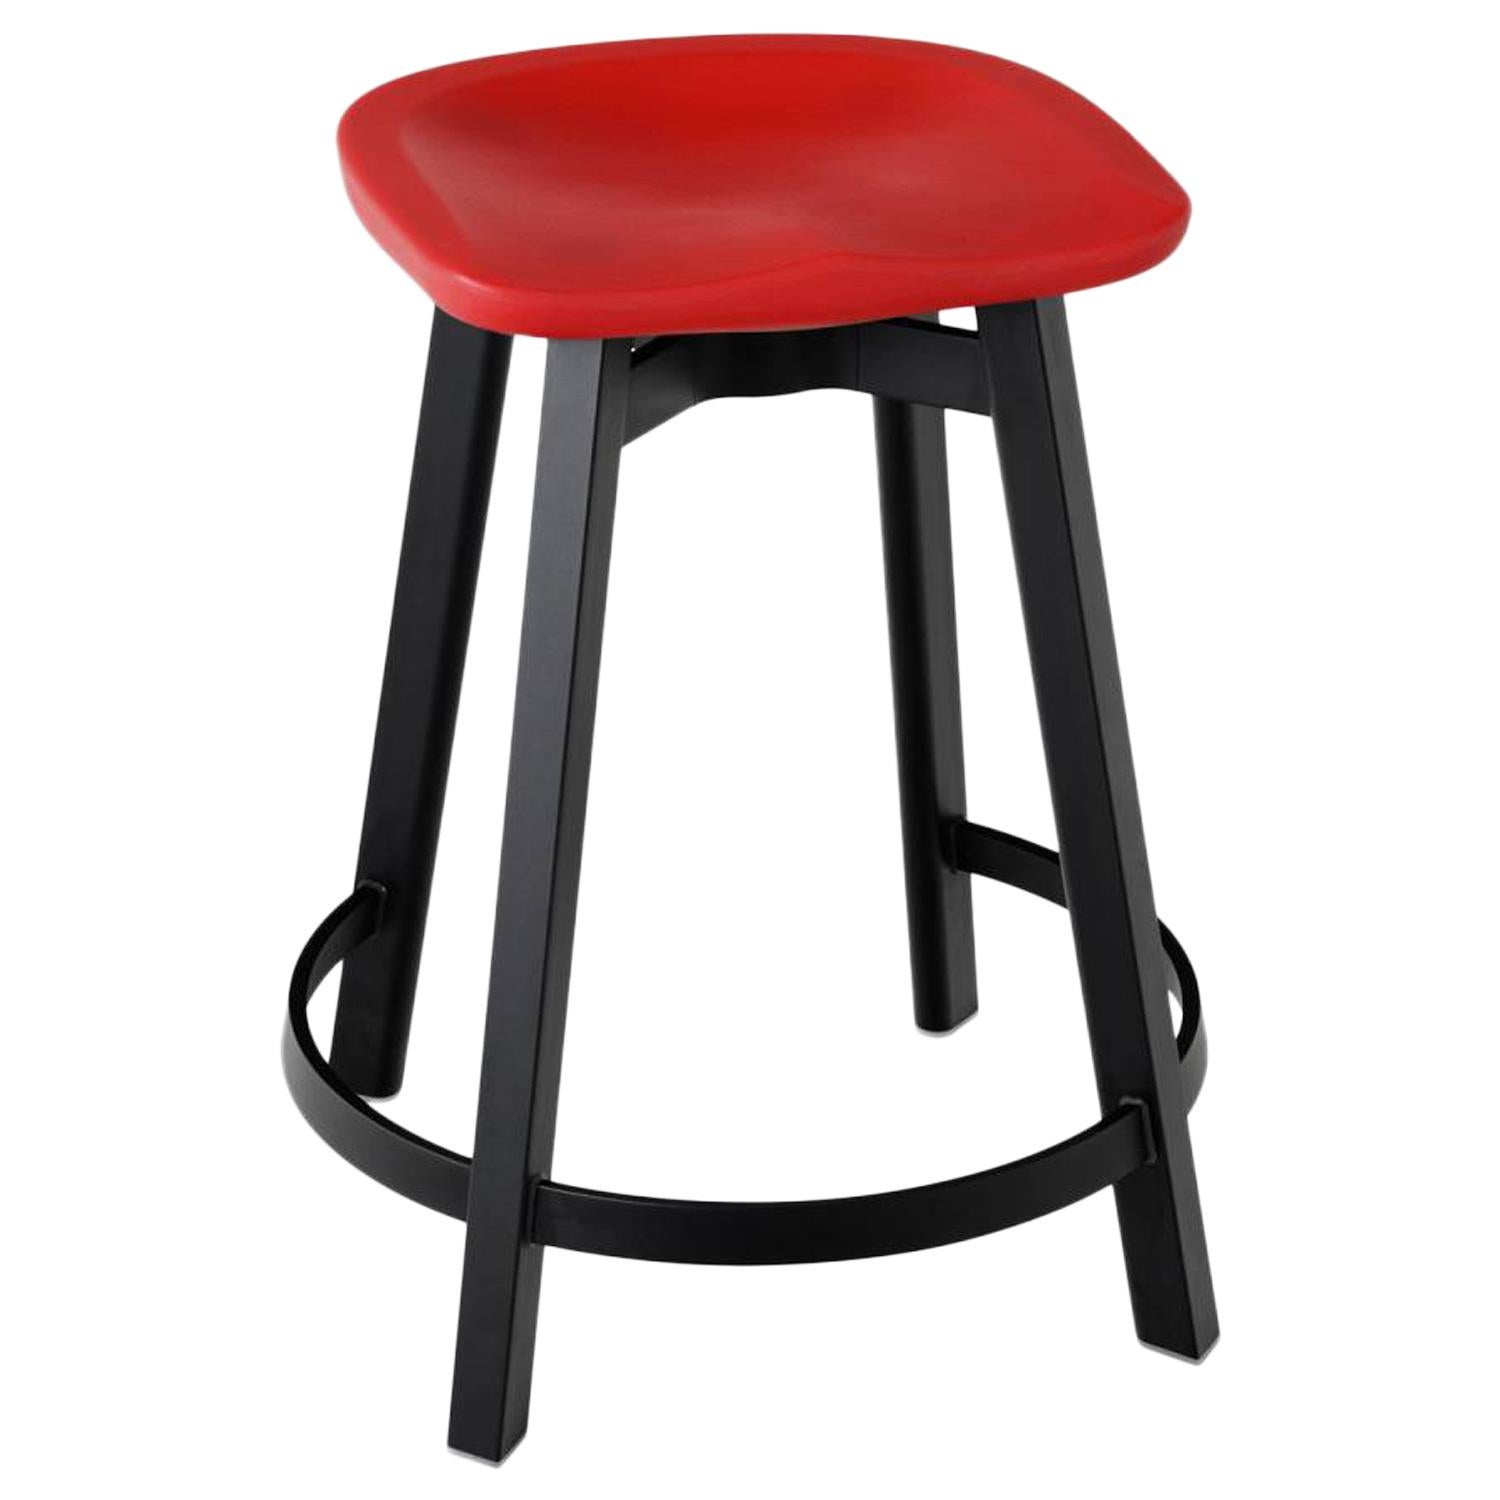 Emeco Su Counter Stool in Black Aluminum with Red Seat by Nendo